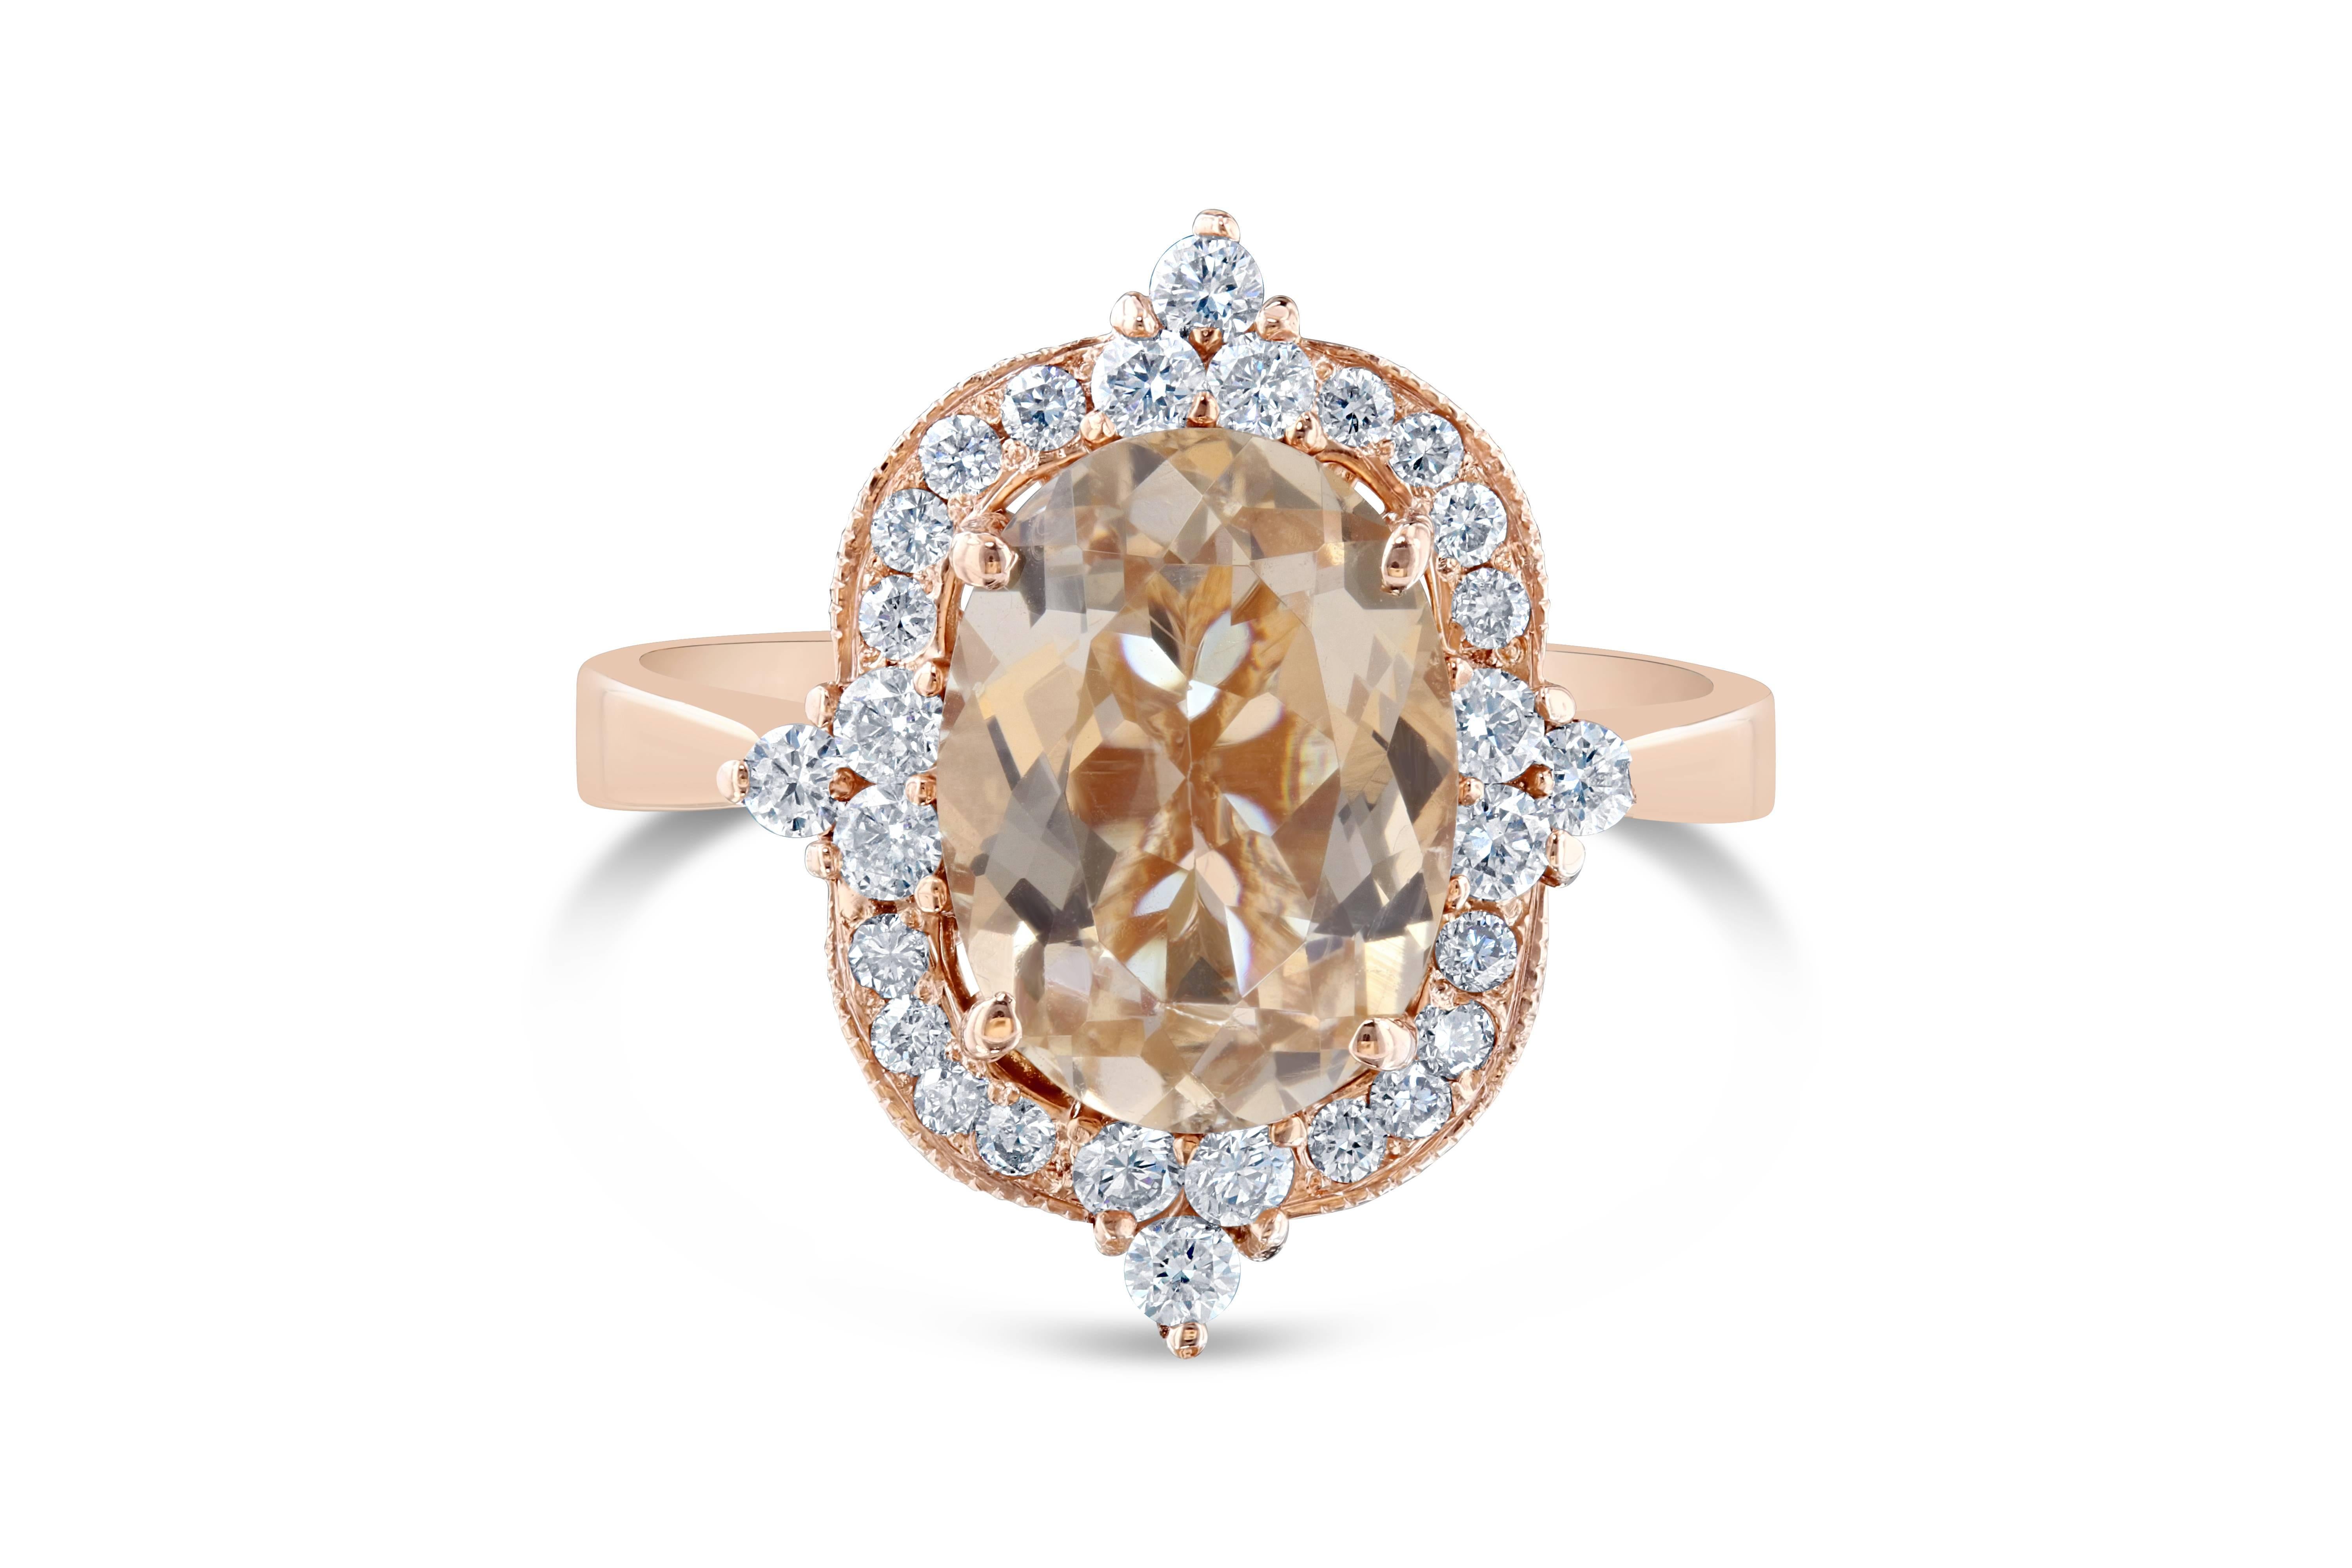 This ring has a 2.57 carat Oval Cut Morganite in the center of the ring and is surrounded by 28 Round Brilliant Cut Diamonds that weigh 0.44 carats (Clarity: VS2 and Color: H). The ring is casted in 14K Rose gold and weighs approximately 4.9 grams..